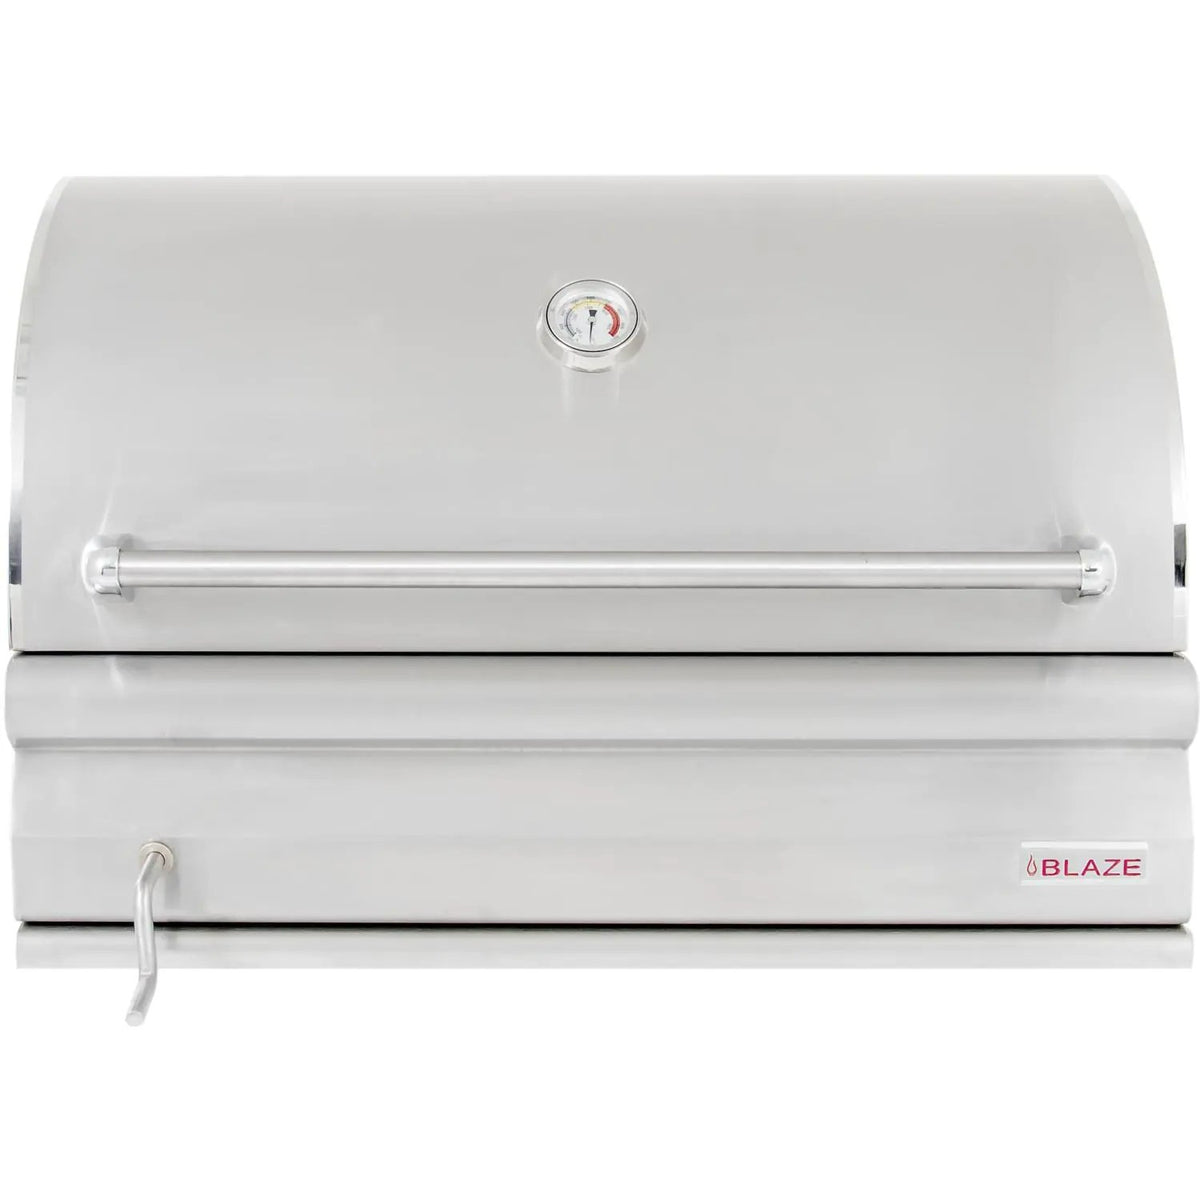 Blaze BLZ-ELEC-21 Stainless Steel Electric Grill with Pedestal, 21-inch